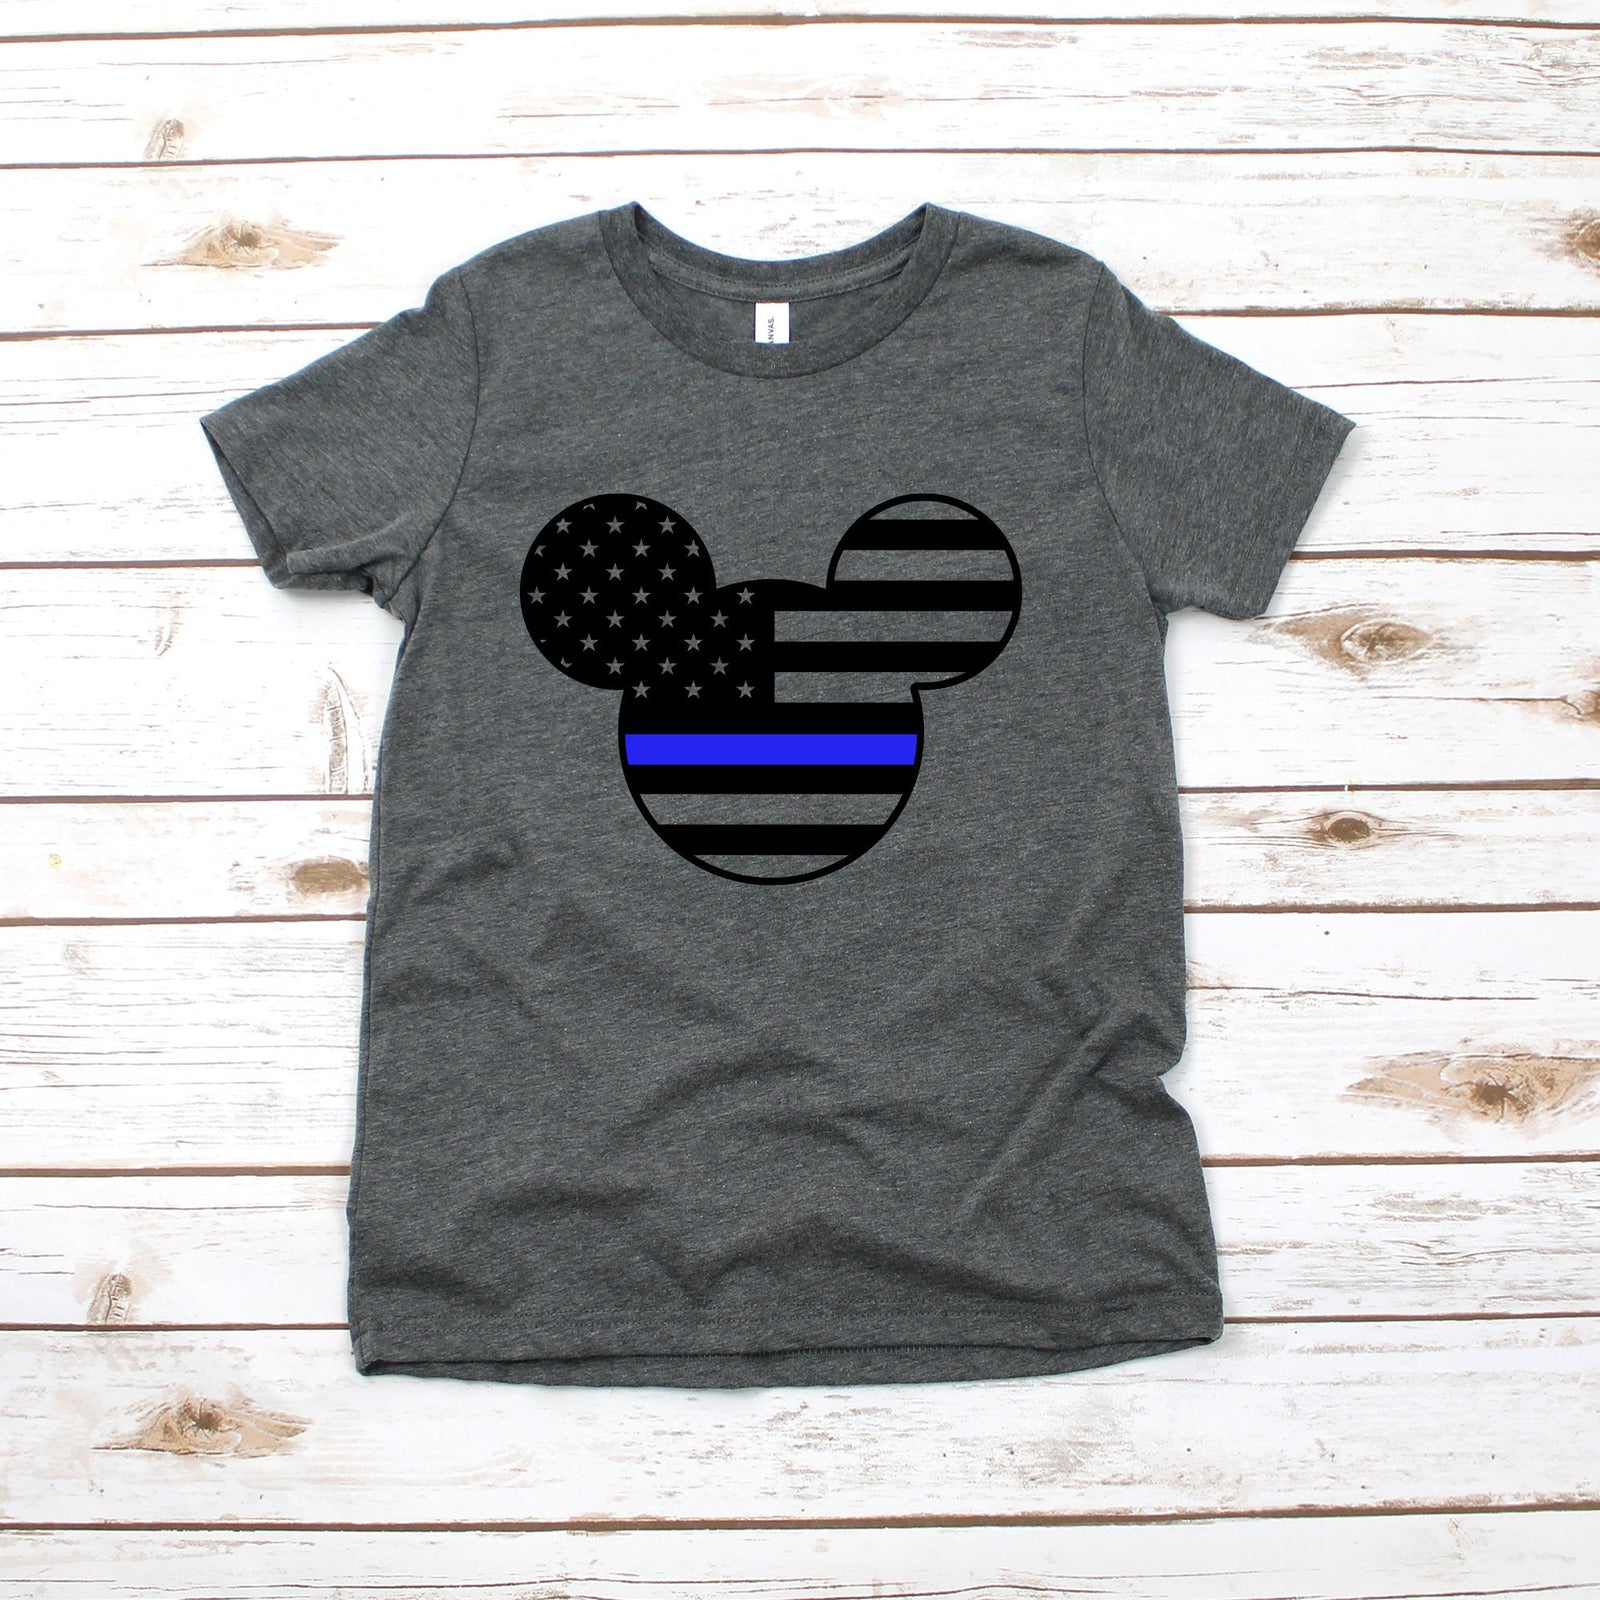 Mickey Mouse Police Stars and Stripes Kids T Shirt - Infant Toddler Youth Mickey Shirt - Disney Kids Shirts - Family Matching